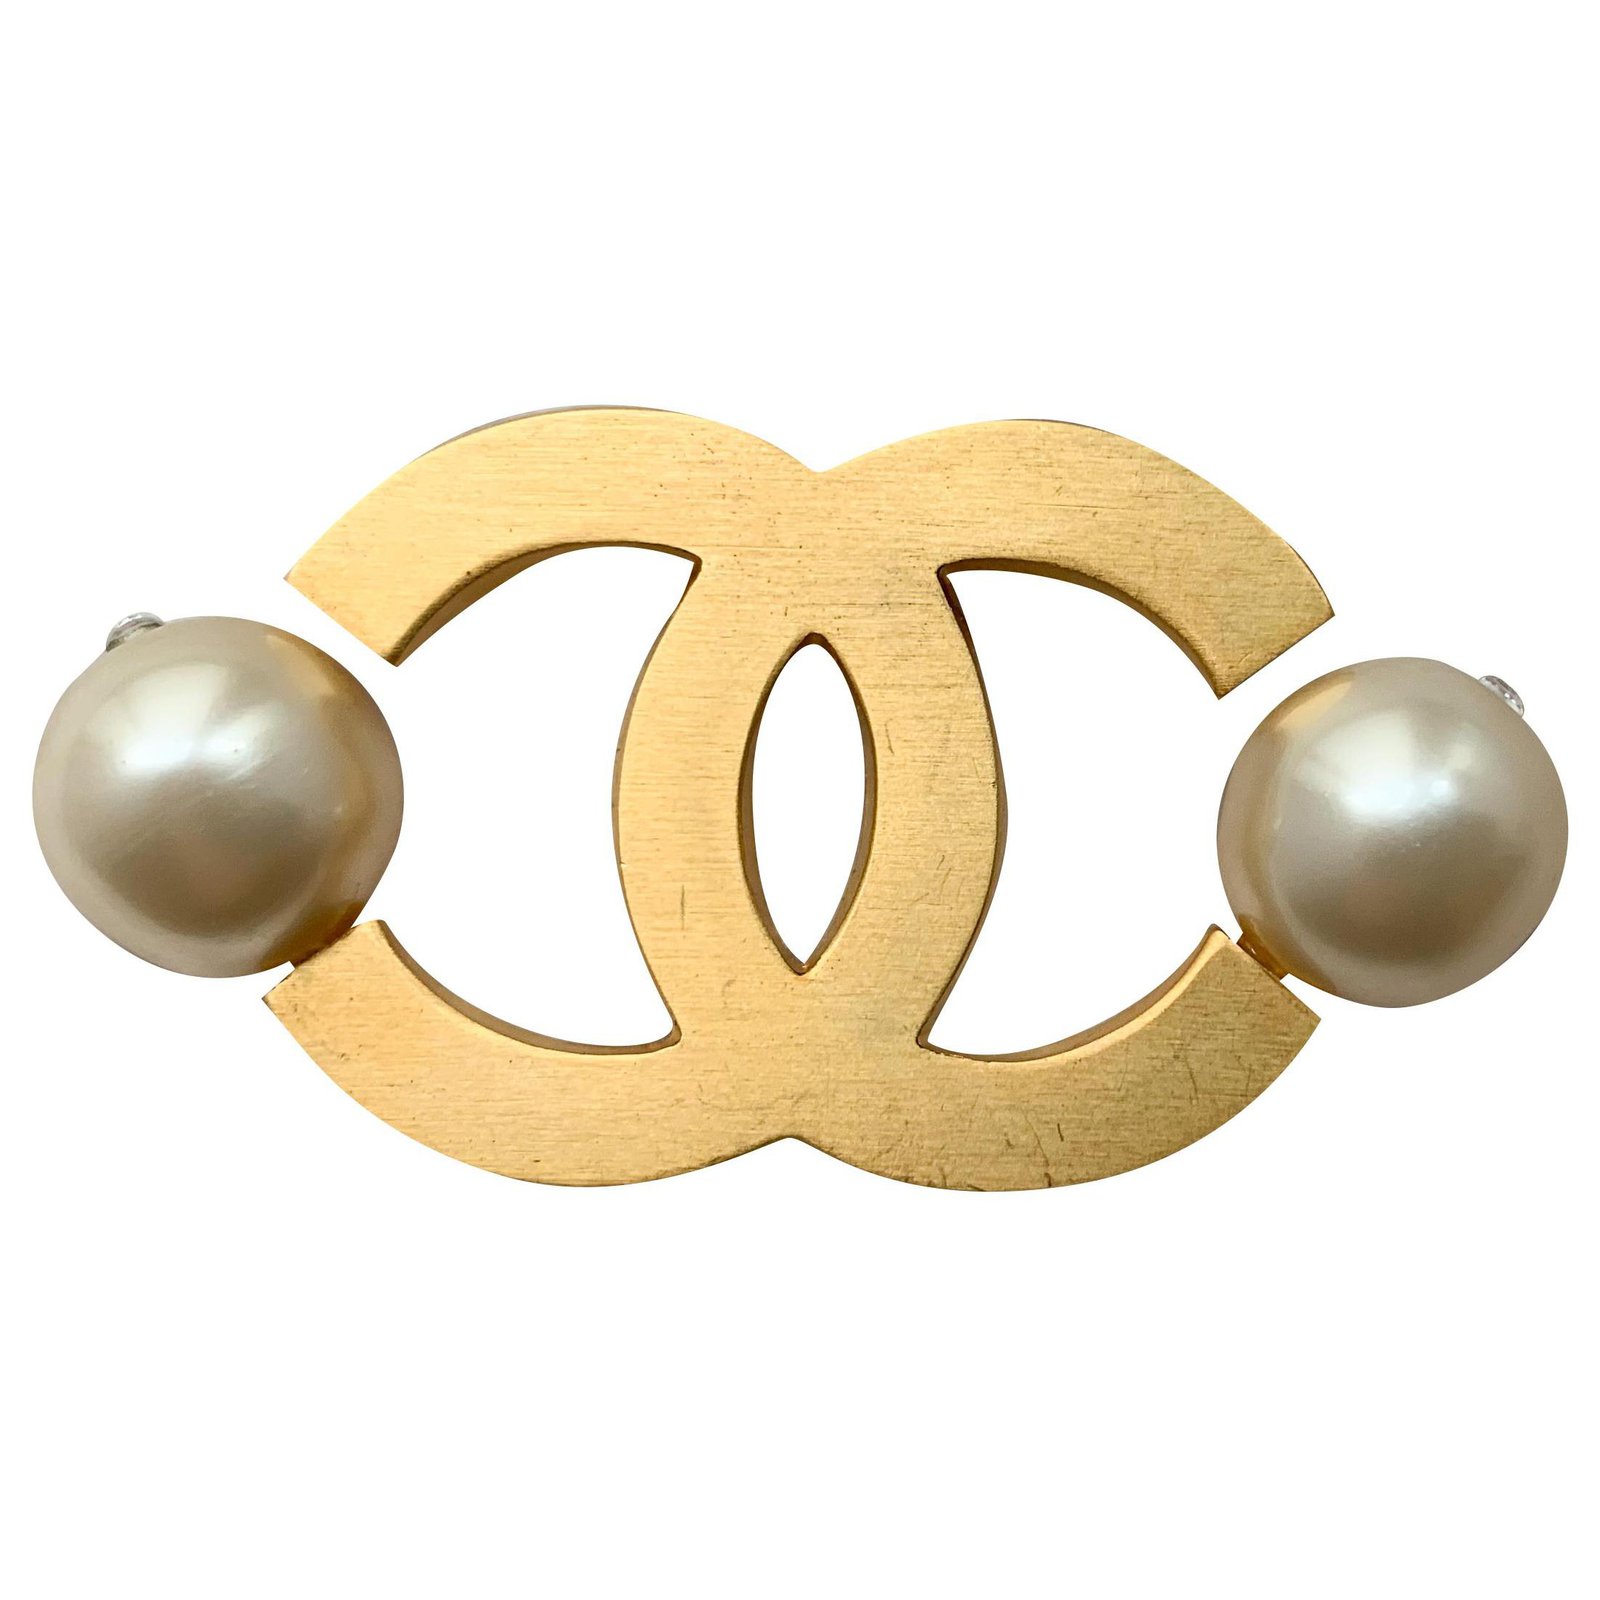 Chanel CC Faux Pearl Gold Tone Metal Brooch Chanel